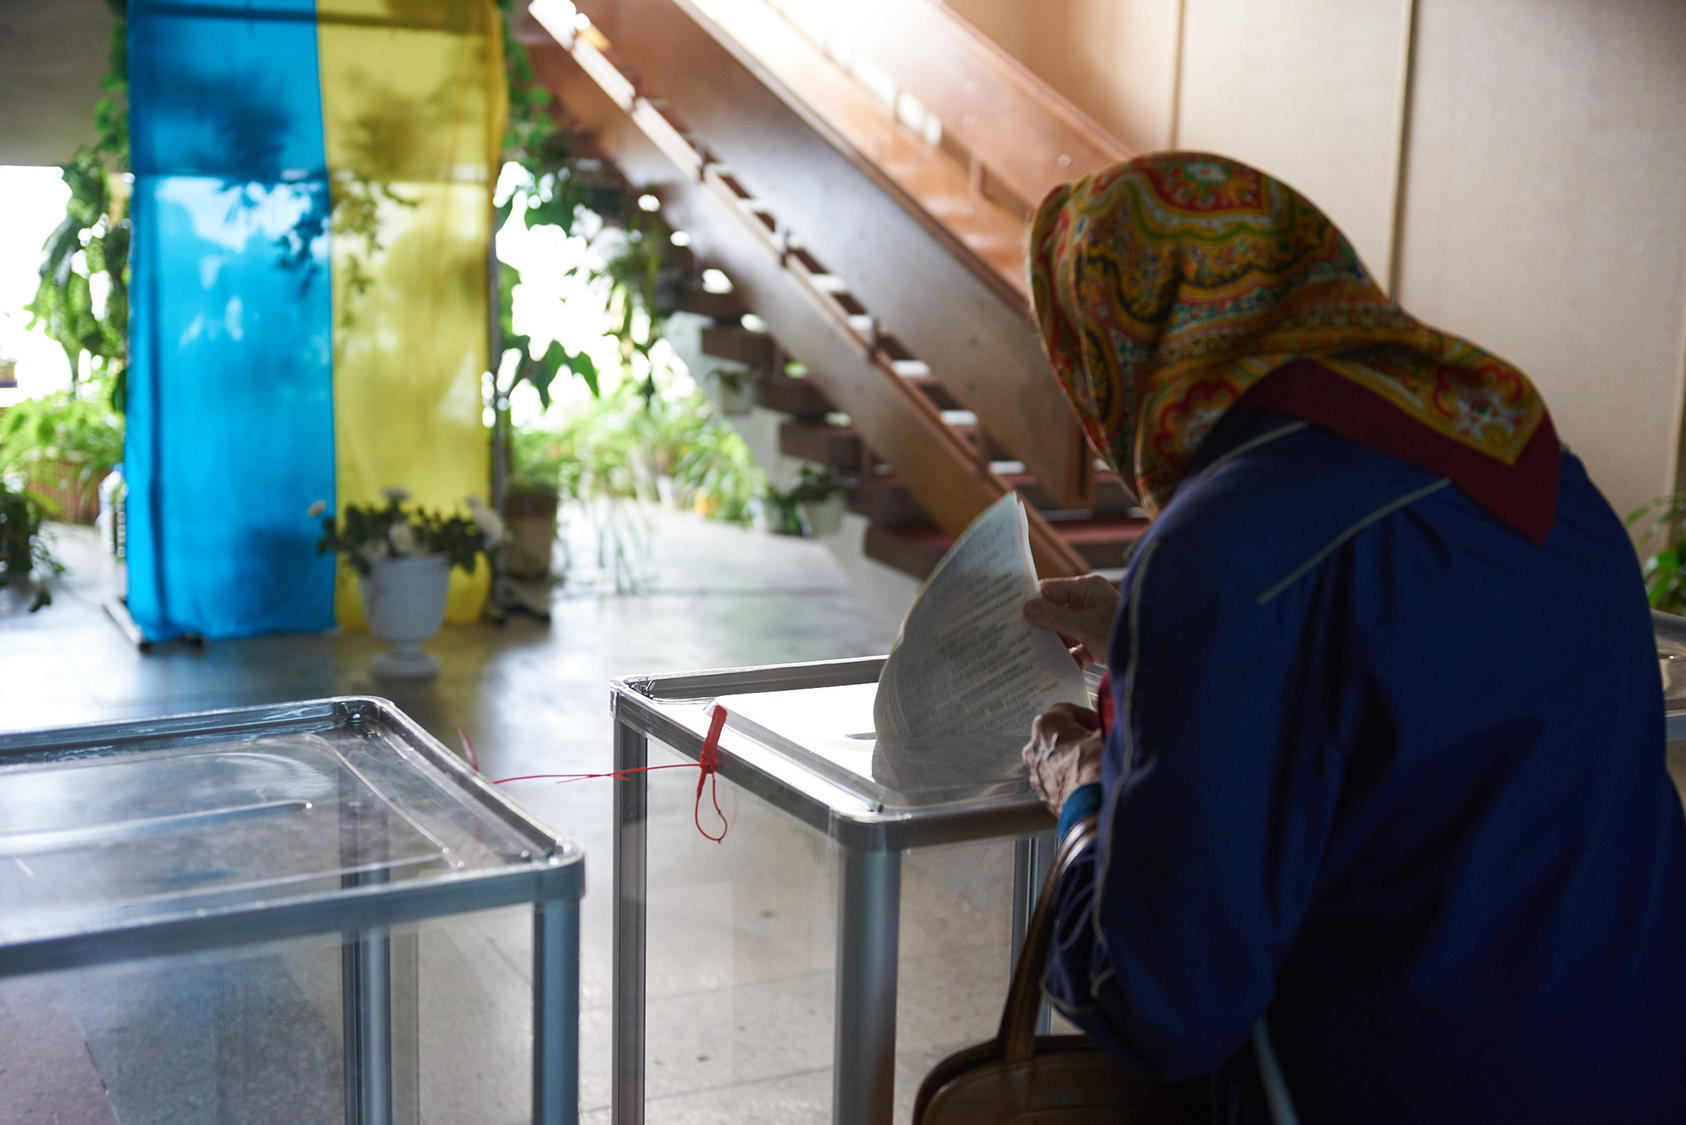 Ukrainian woman voting in the 2015 local elections